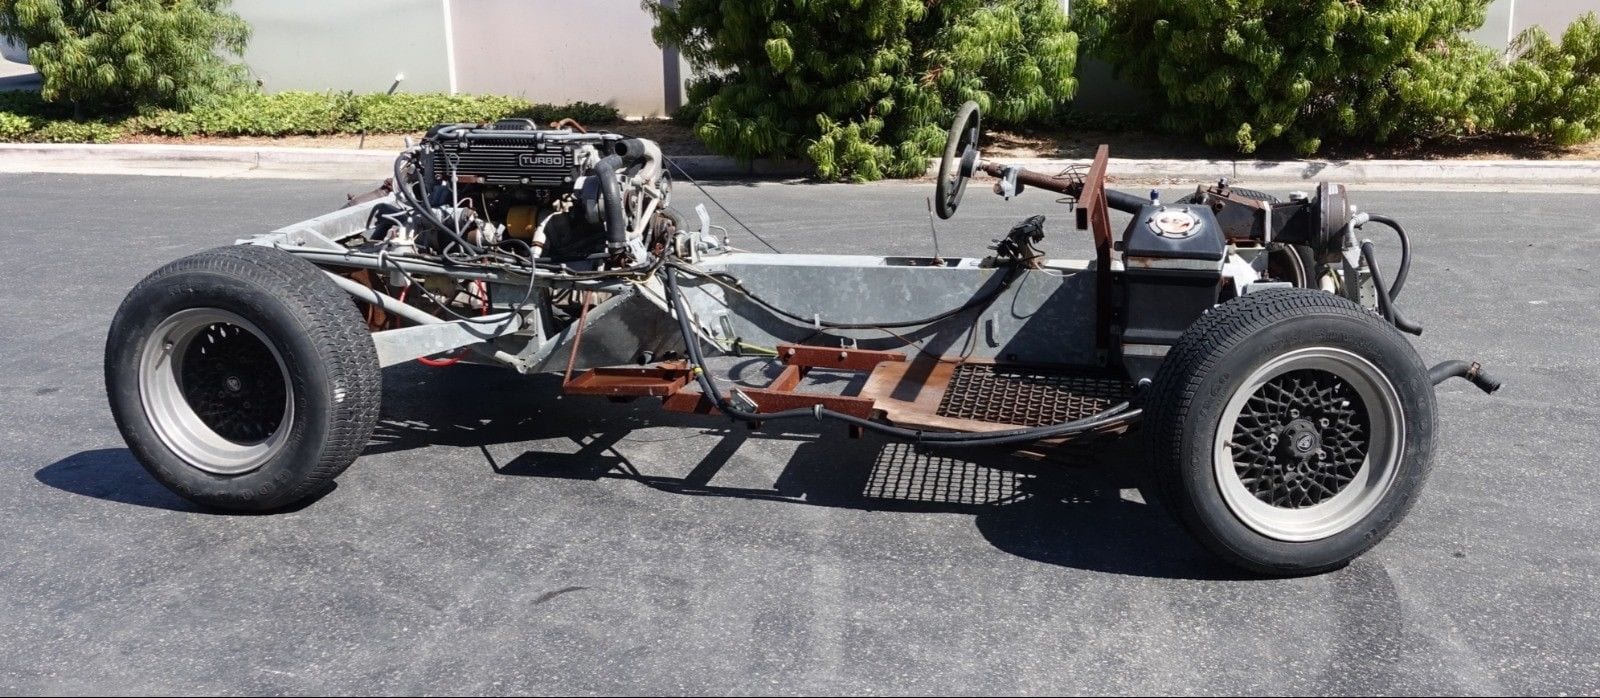 Lotus Esprit rolling chassis for sale